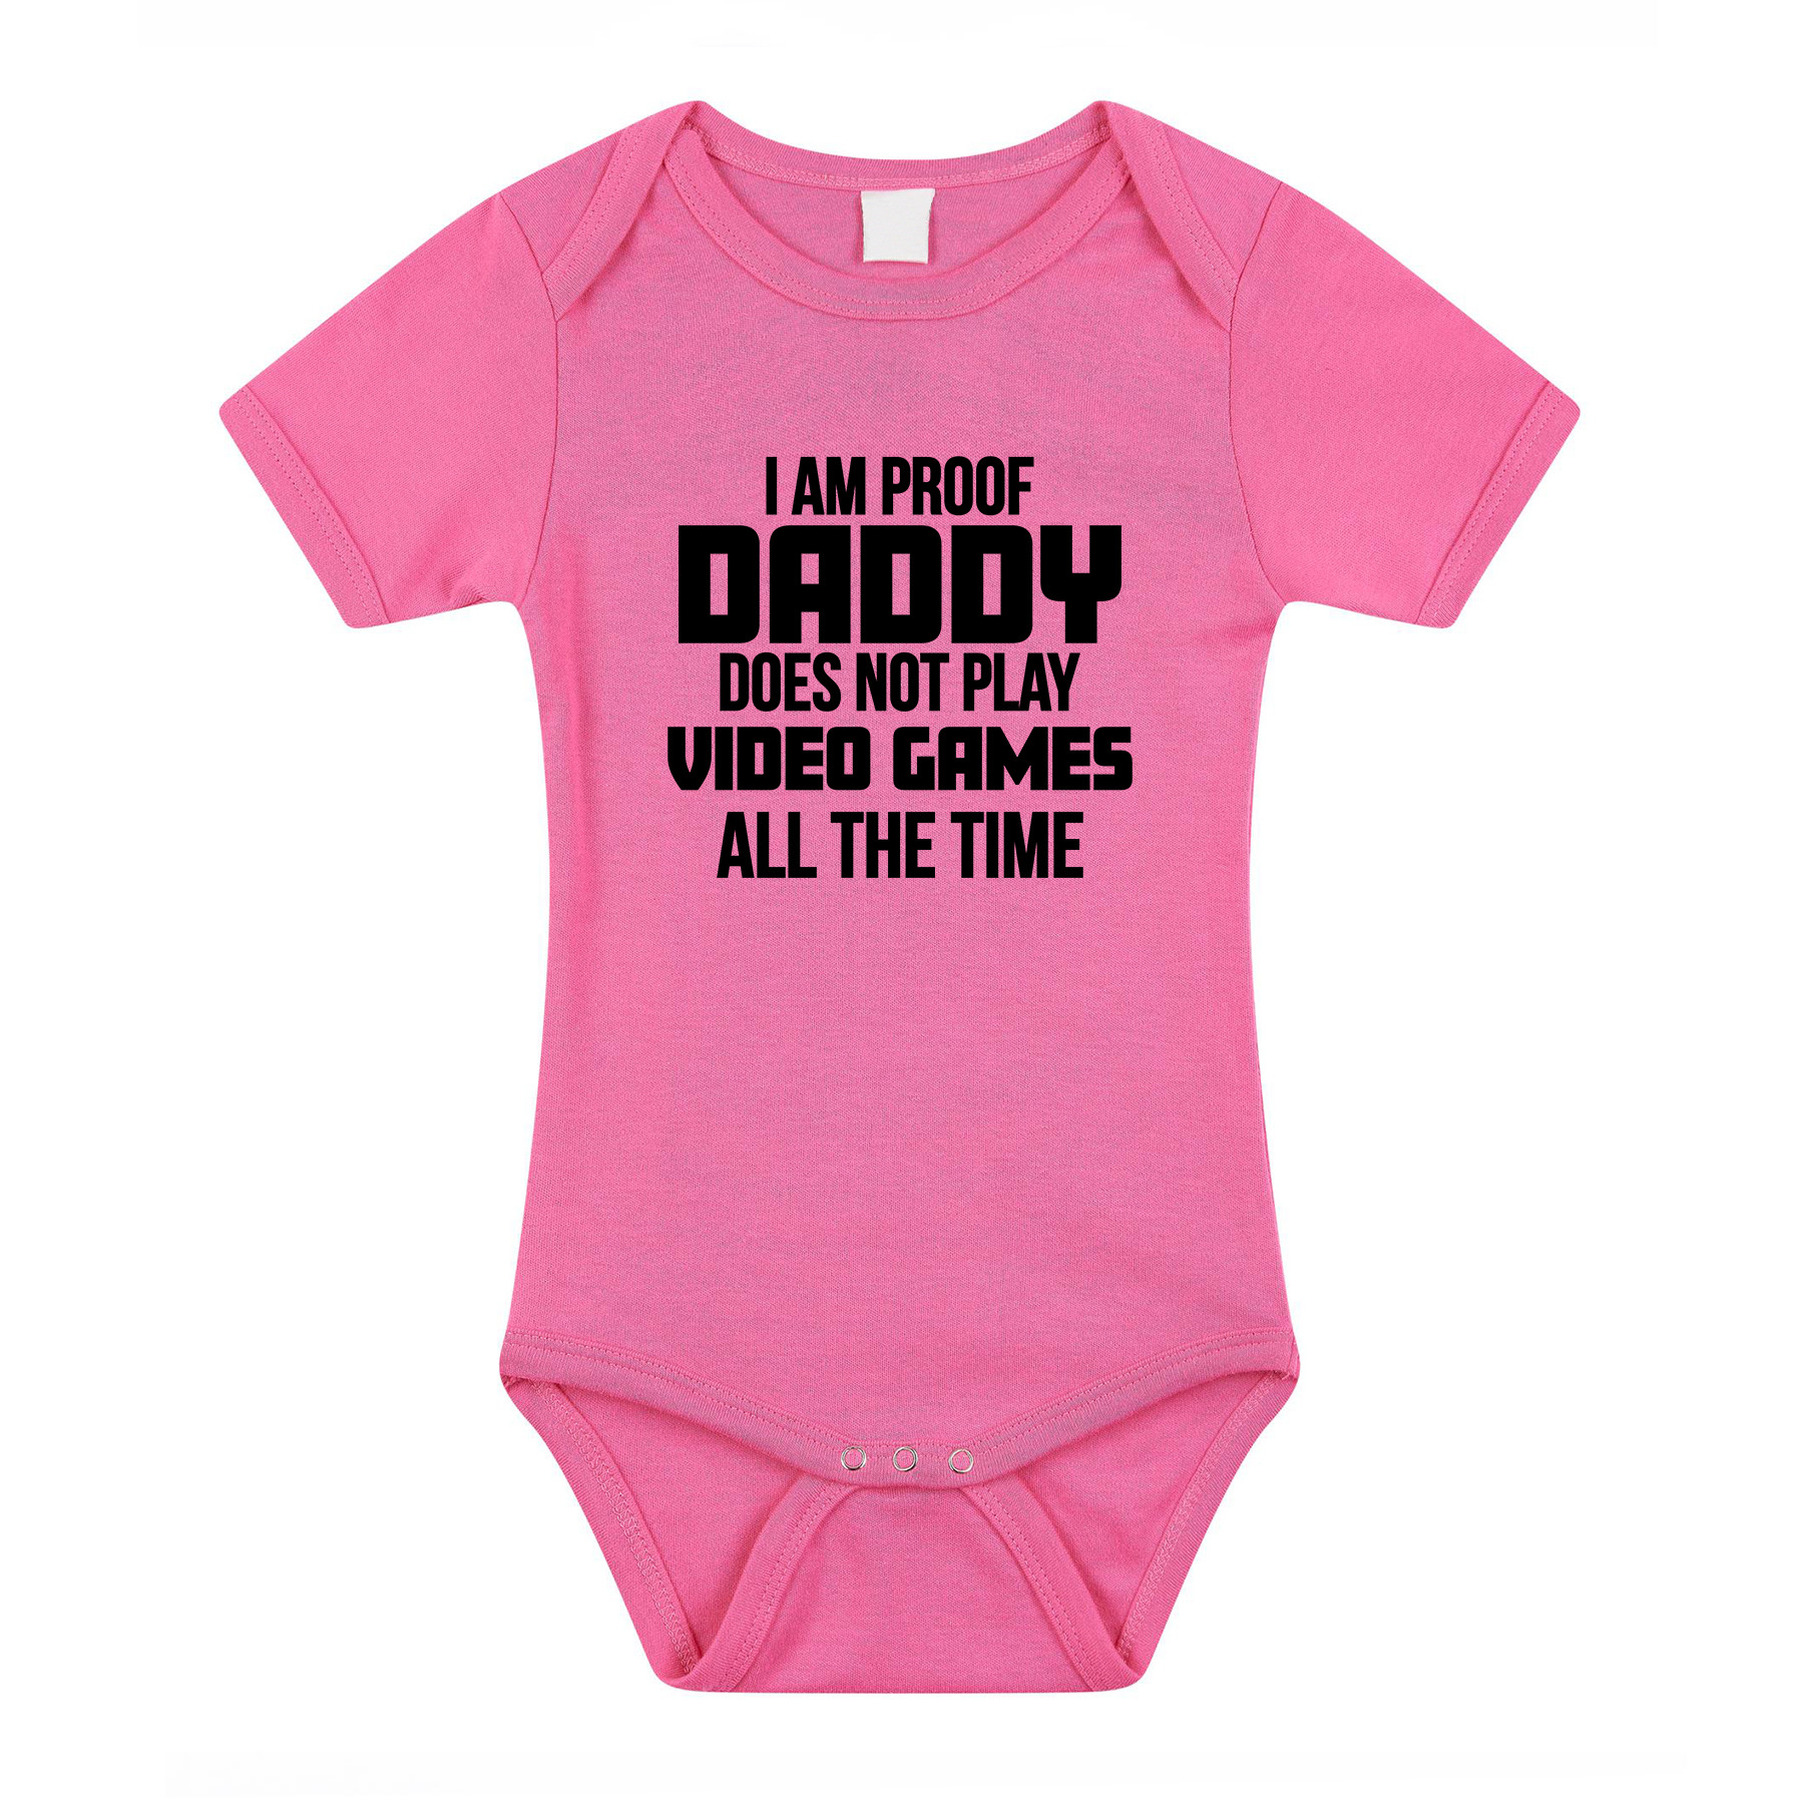 Afbeelding van Proof daddy does not only play games cadeau baby rompertje roze meisjes